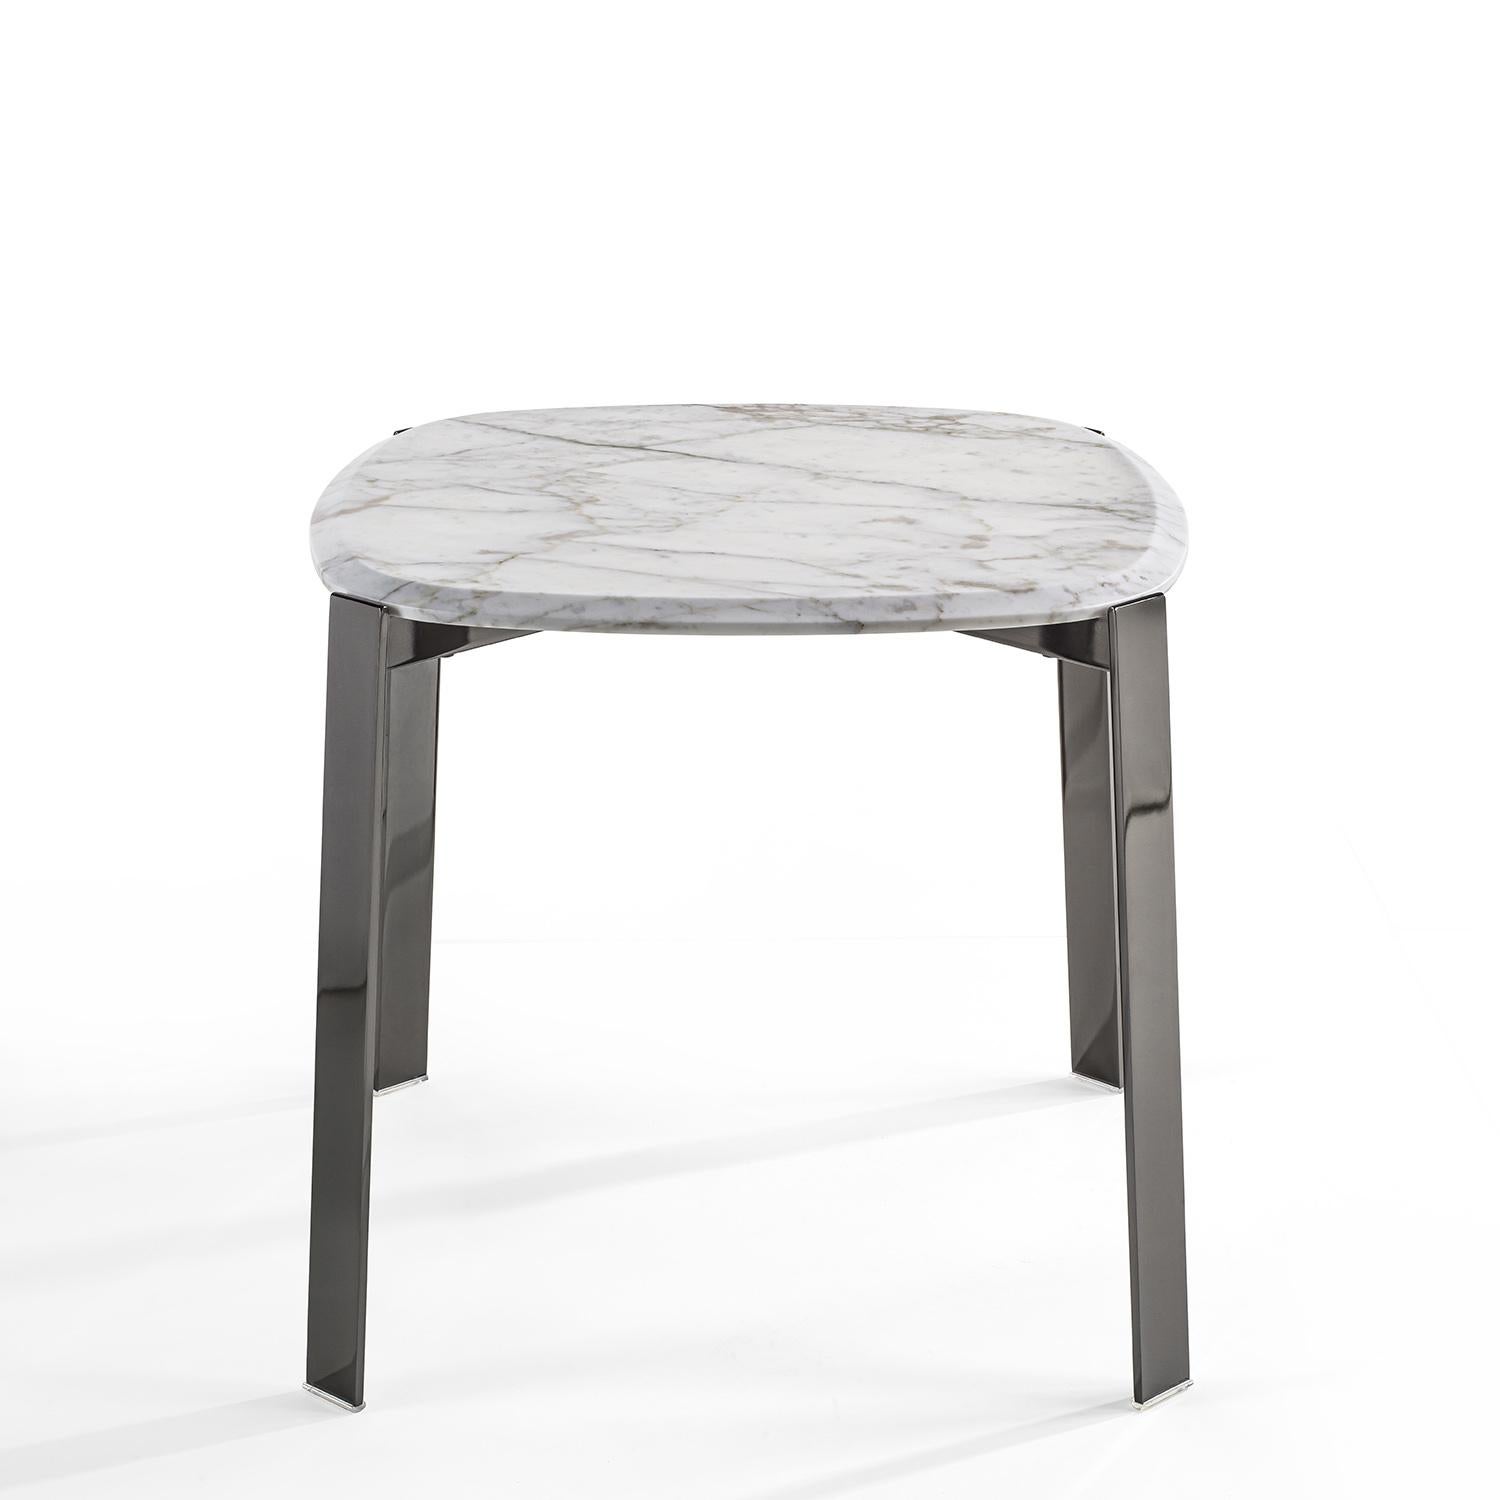 Side Table Peter White with chromed metal
structure and with white calacatta marble top.
Also available with black sahara marble or with
carnico grey marble top, on request.